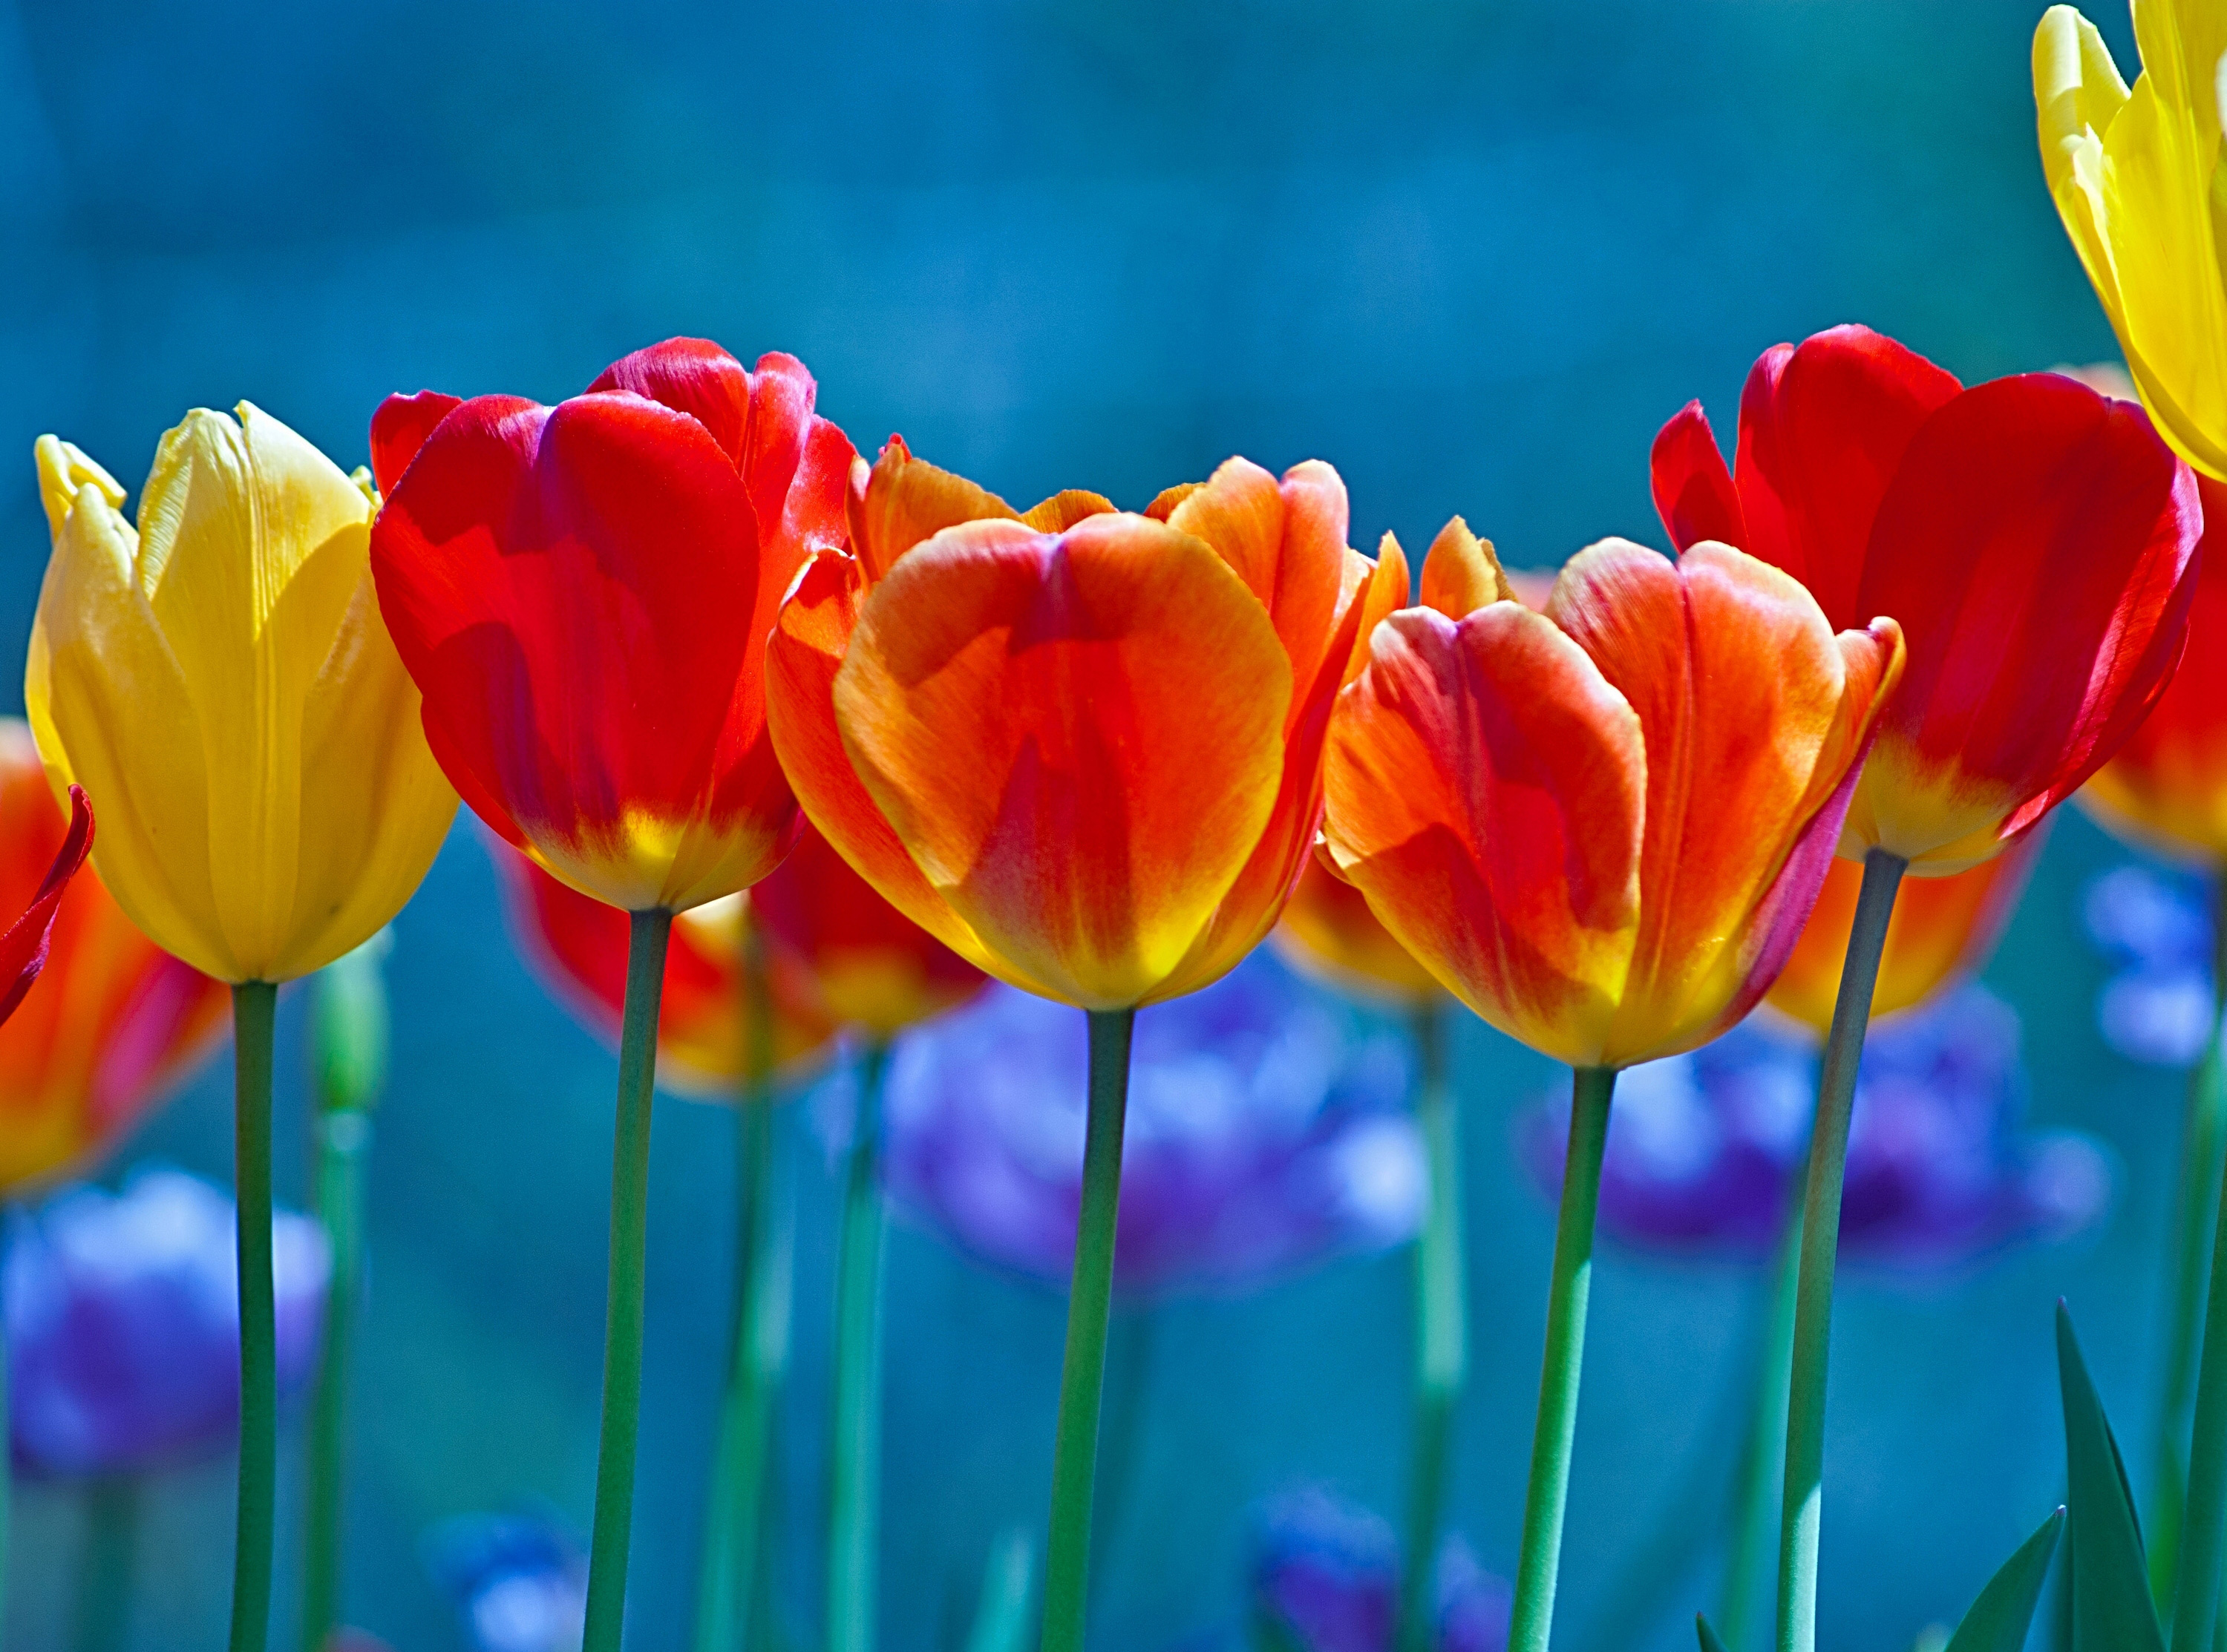 Brightly Colored Tulips  HD Flowers 4k Wallpapers  Images 